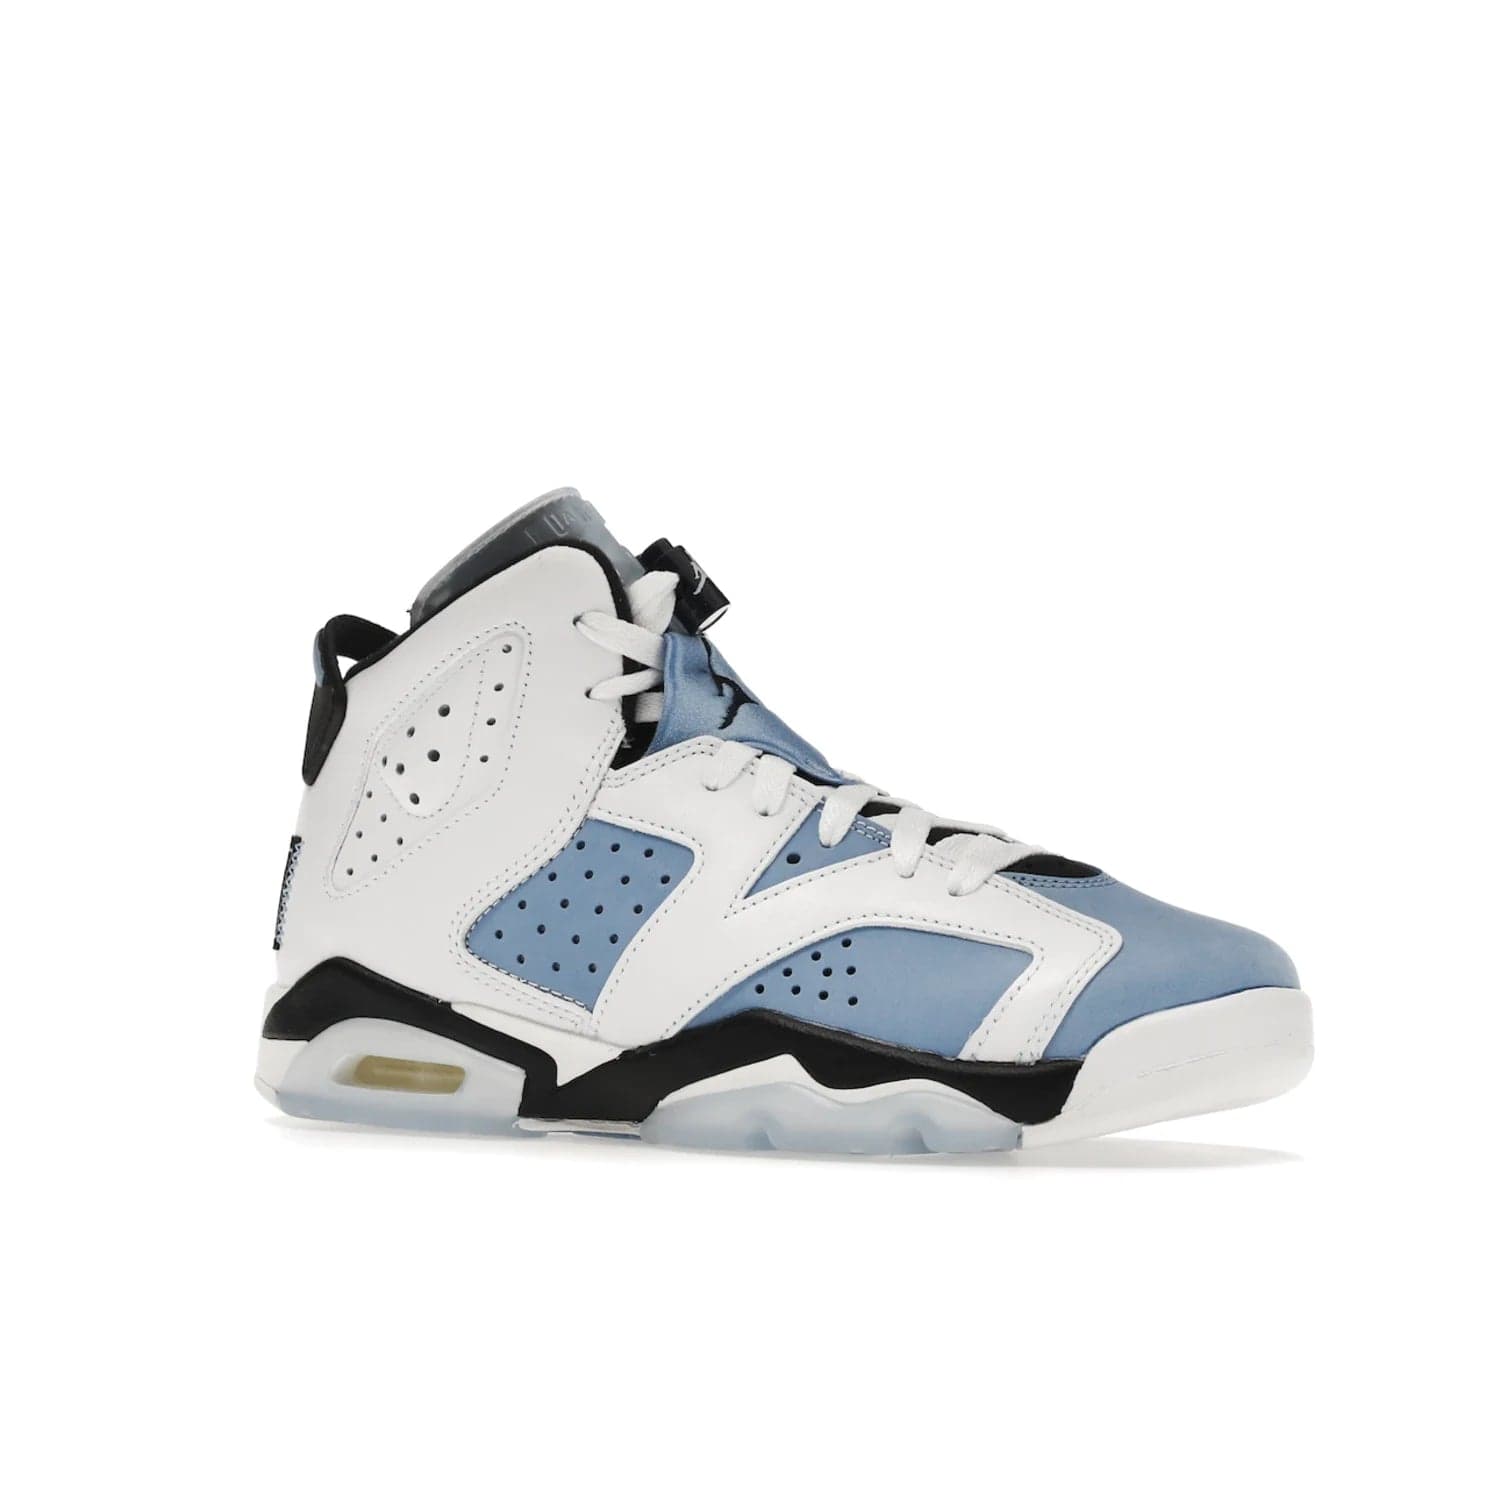 Jordan 6 Retro UNC White (GS) - Image 4 - Only at www.BallersClubKickz.com - Air Jordan 6 Retro UNC White GS: Michael Jordan alma mater, UNC Tar Heels, featuring colorway, nubuck, leather, Jumpman branding and a visible Air unit. Translucent blue/white outsole, perfect for completing sneaker rotation.